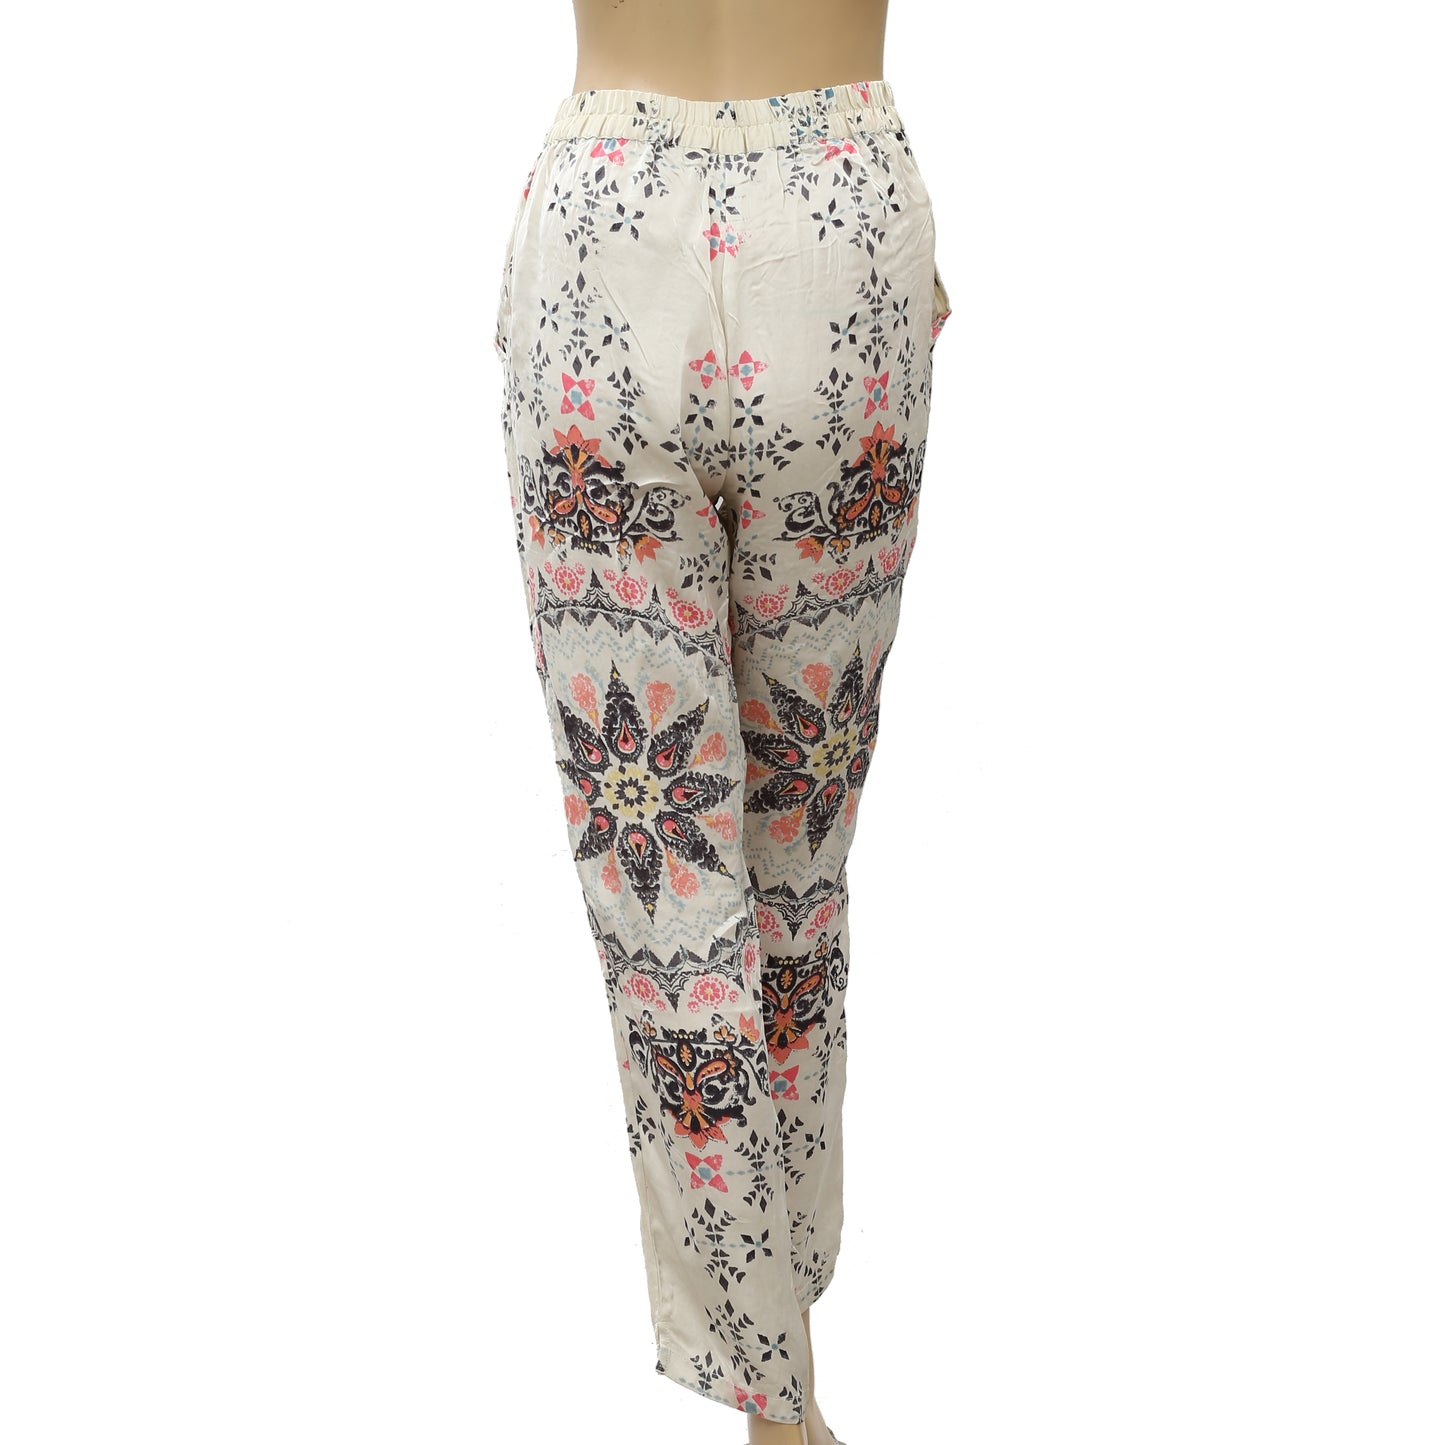 Odd Molly Anthropologie Floral Printed Pants